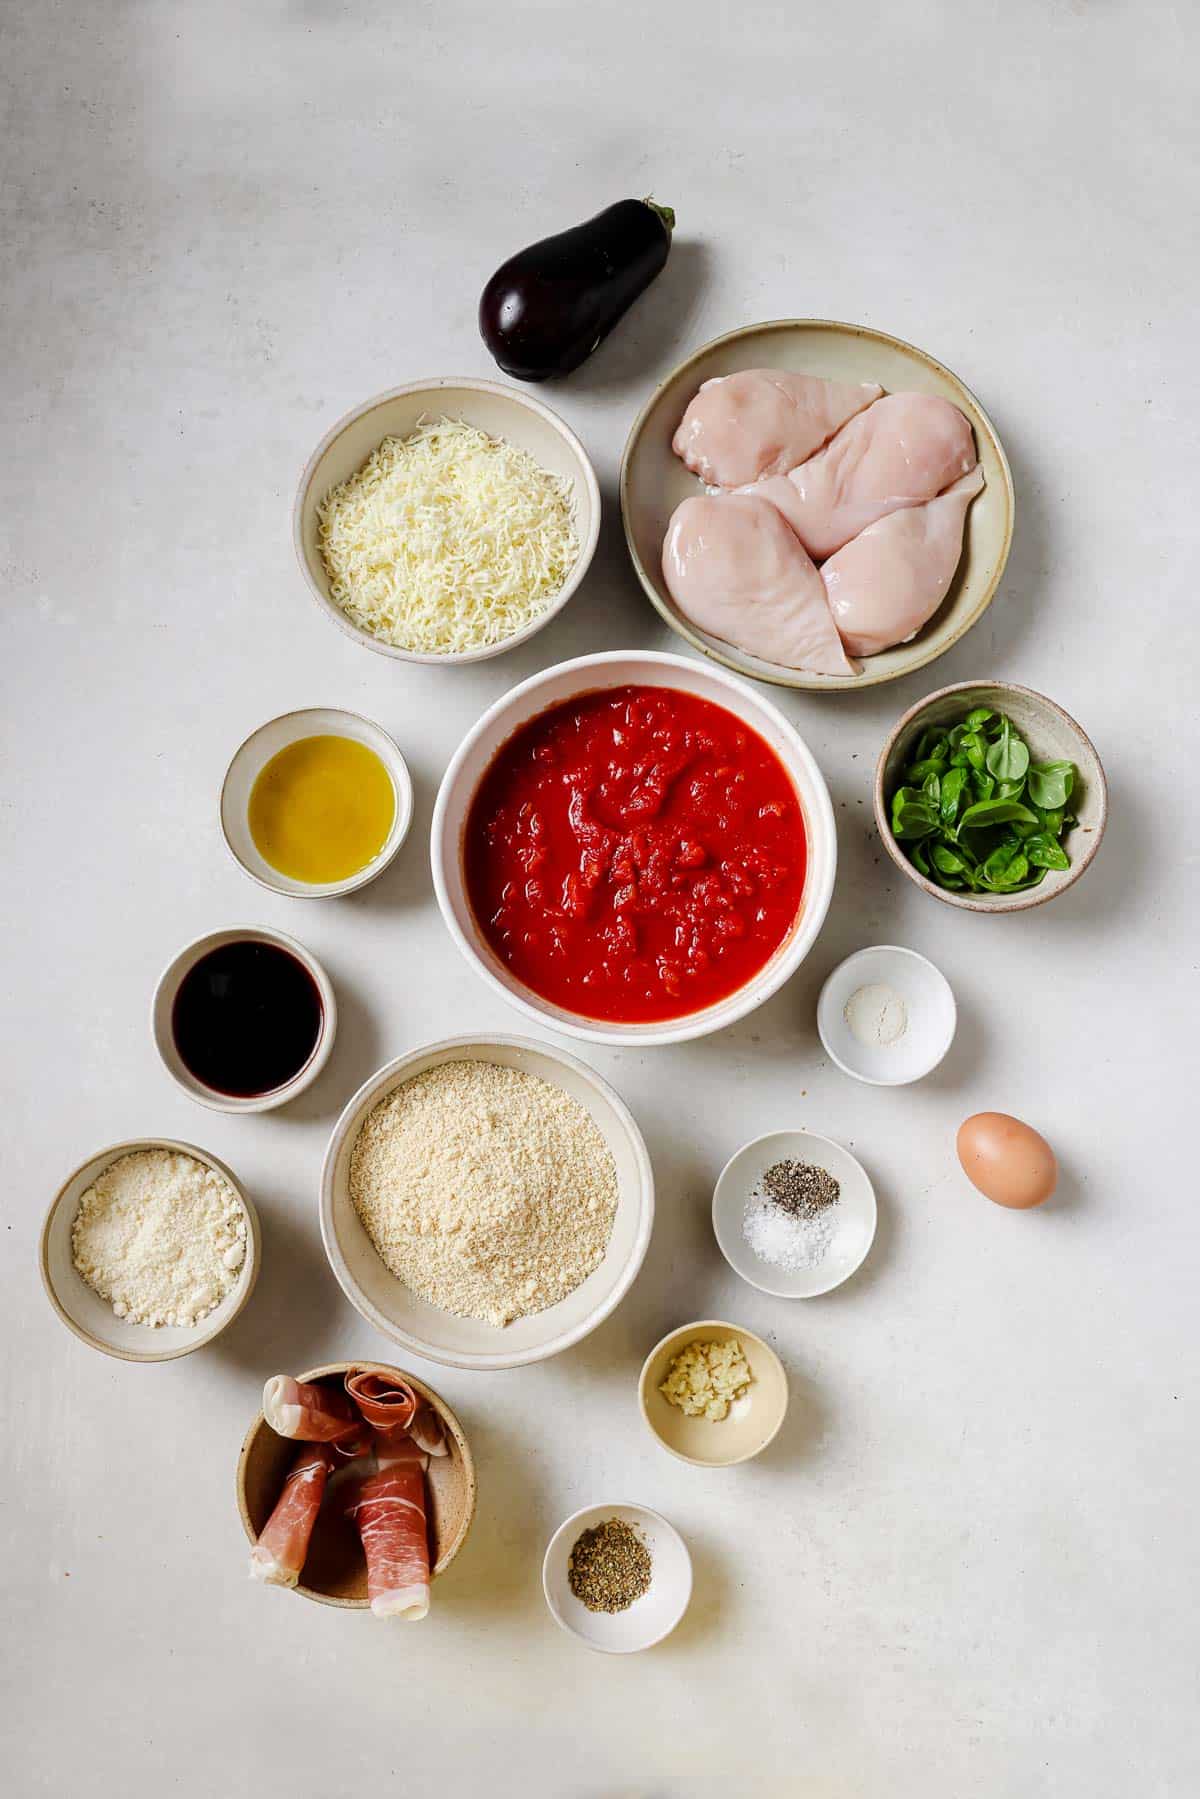 The ingredients for making a chicken sorrentino recipe are laid out on a table in bowls.